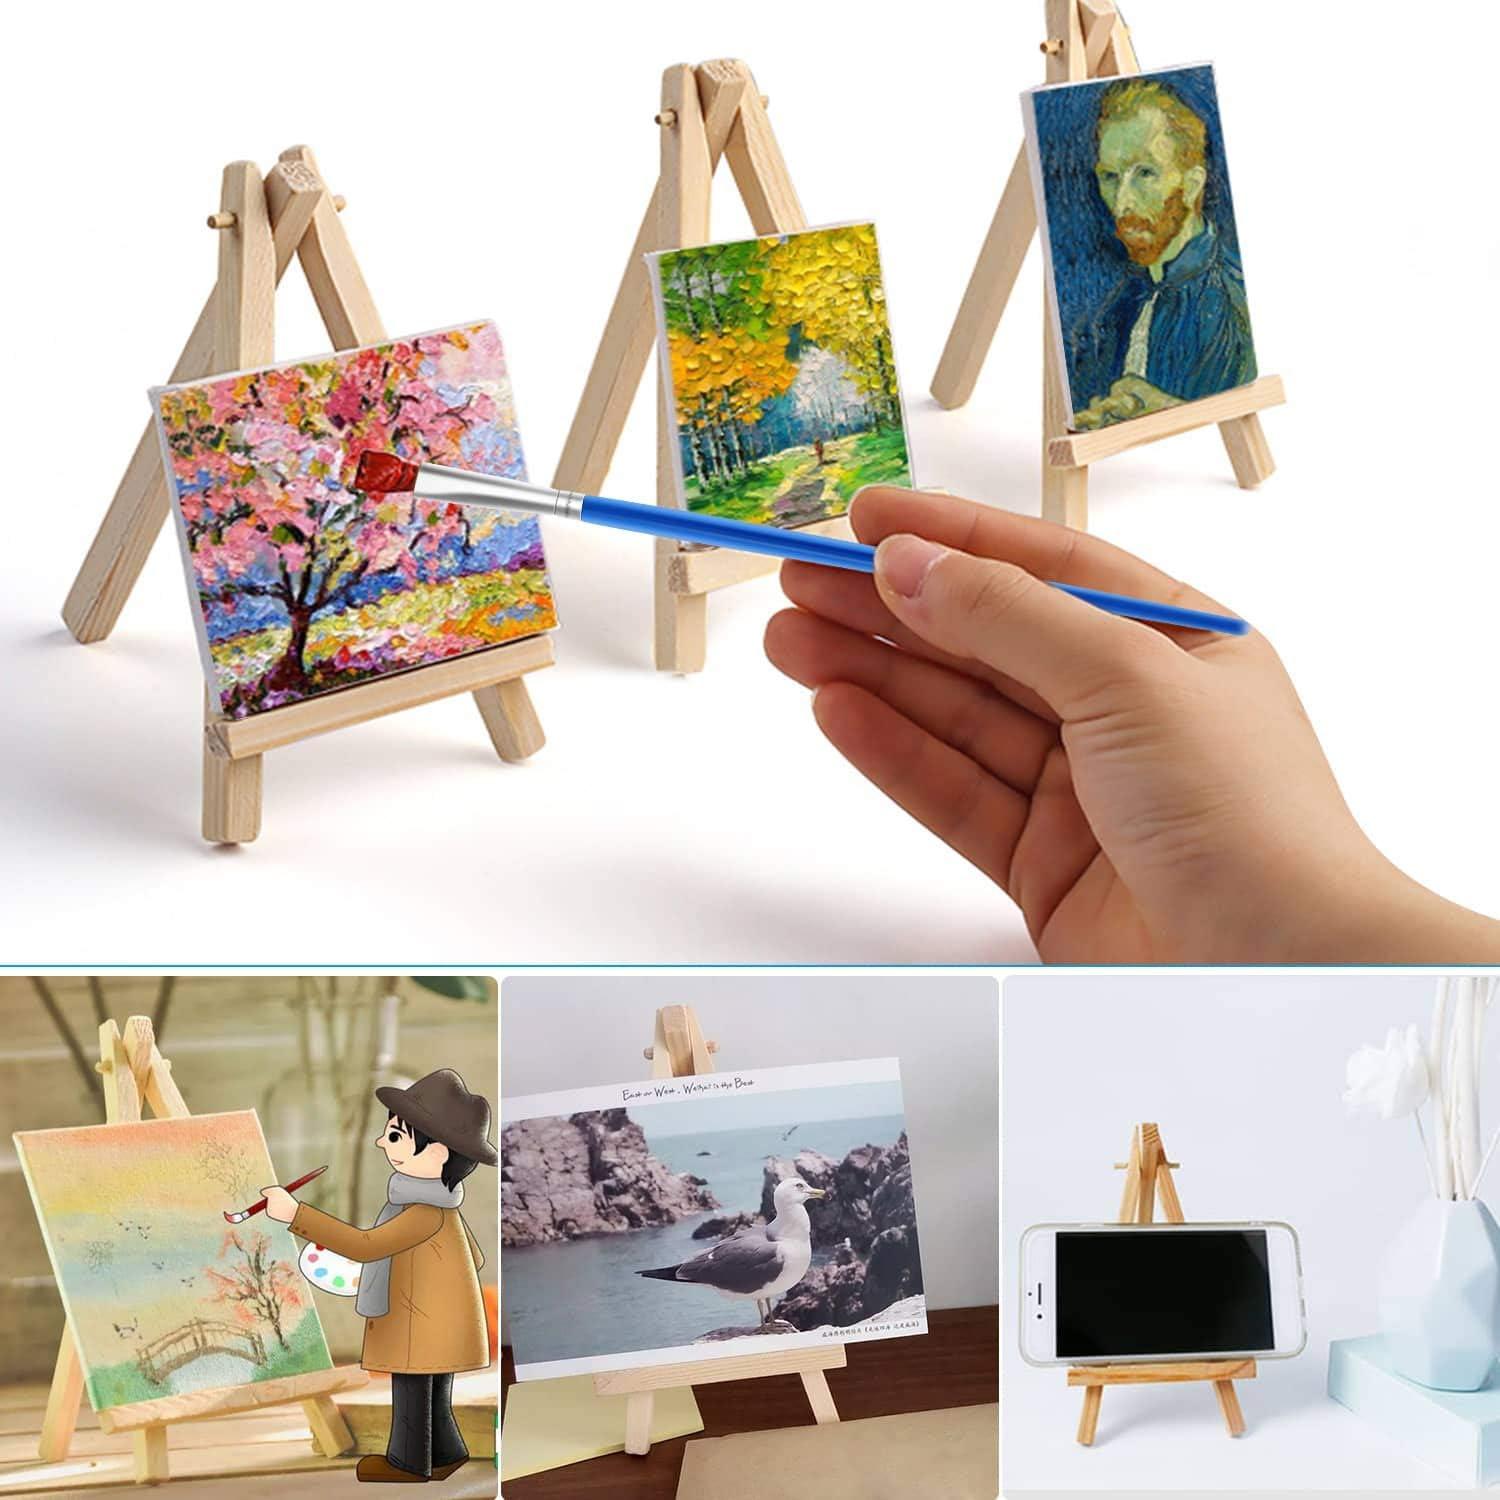 28 Pack Mini Canvas and Easel Set with Mini Watercolor Paint for Painting, 4x4inch Small Canvases for Painting, Other